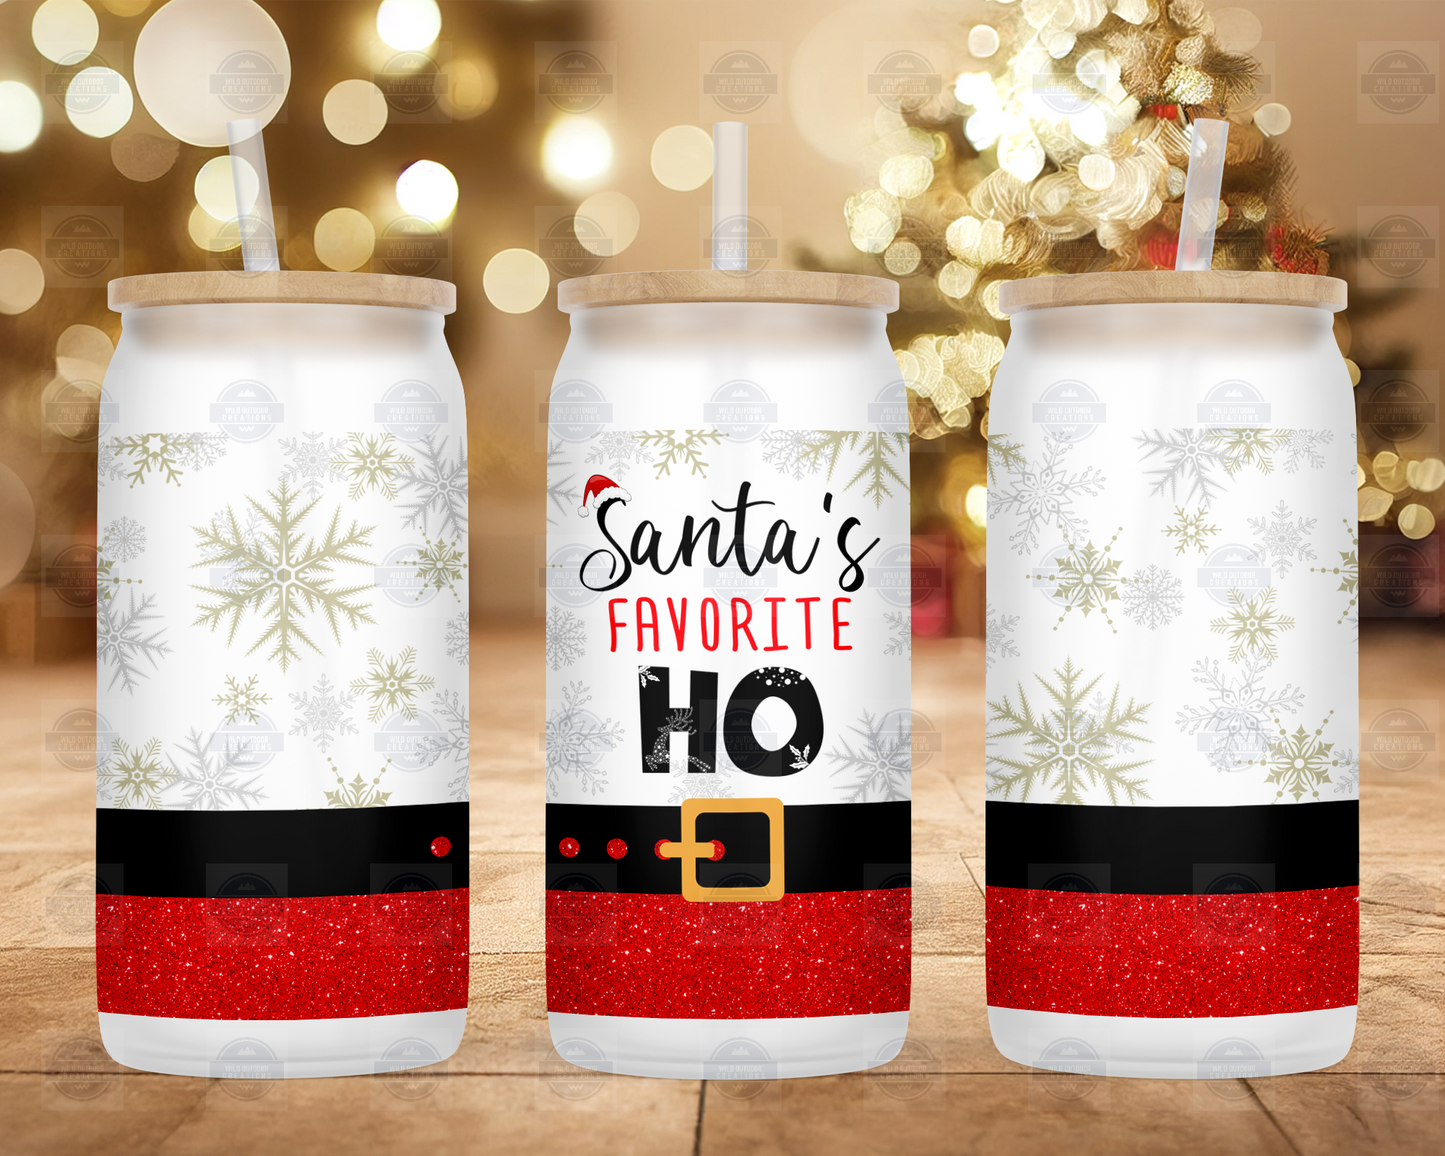 Santa's favorite ho 16oz frosted glass cup, Iced Coffee Cup